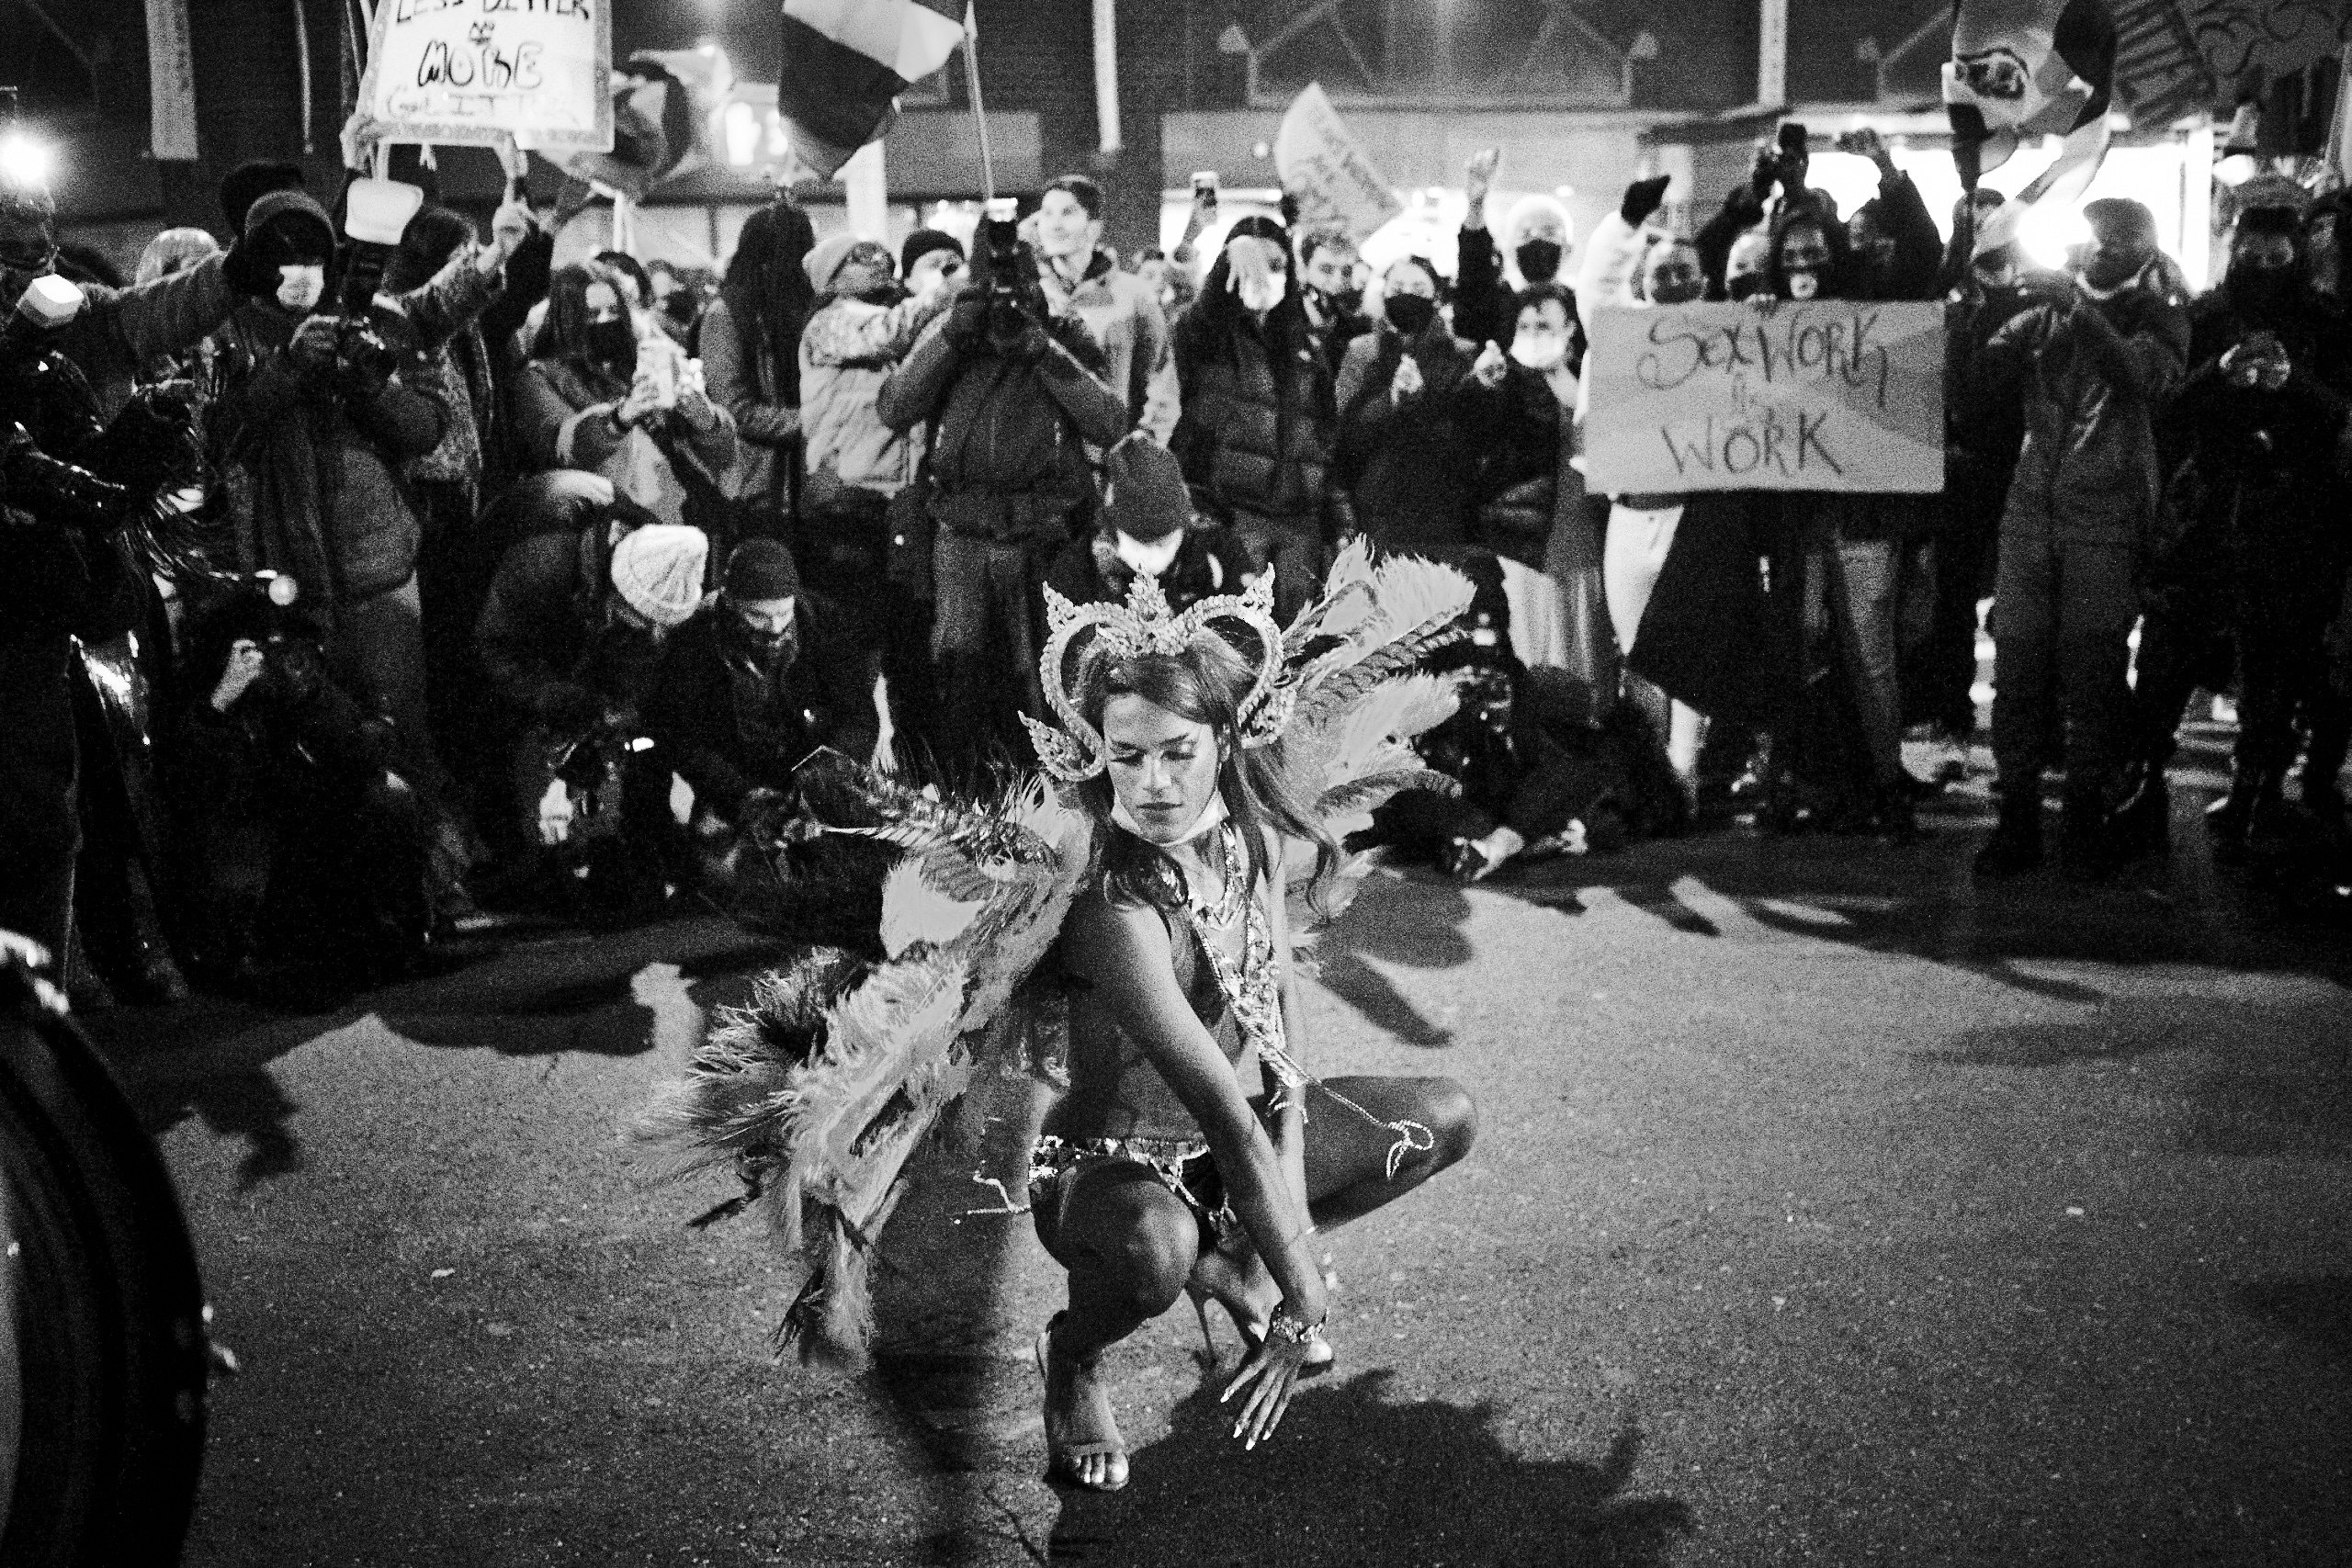 20201231-1_NYC_Protests_Stonewall_NewYearsEve_0240_SeanWaltrous